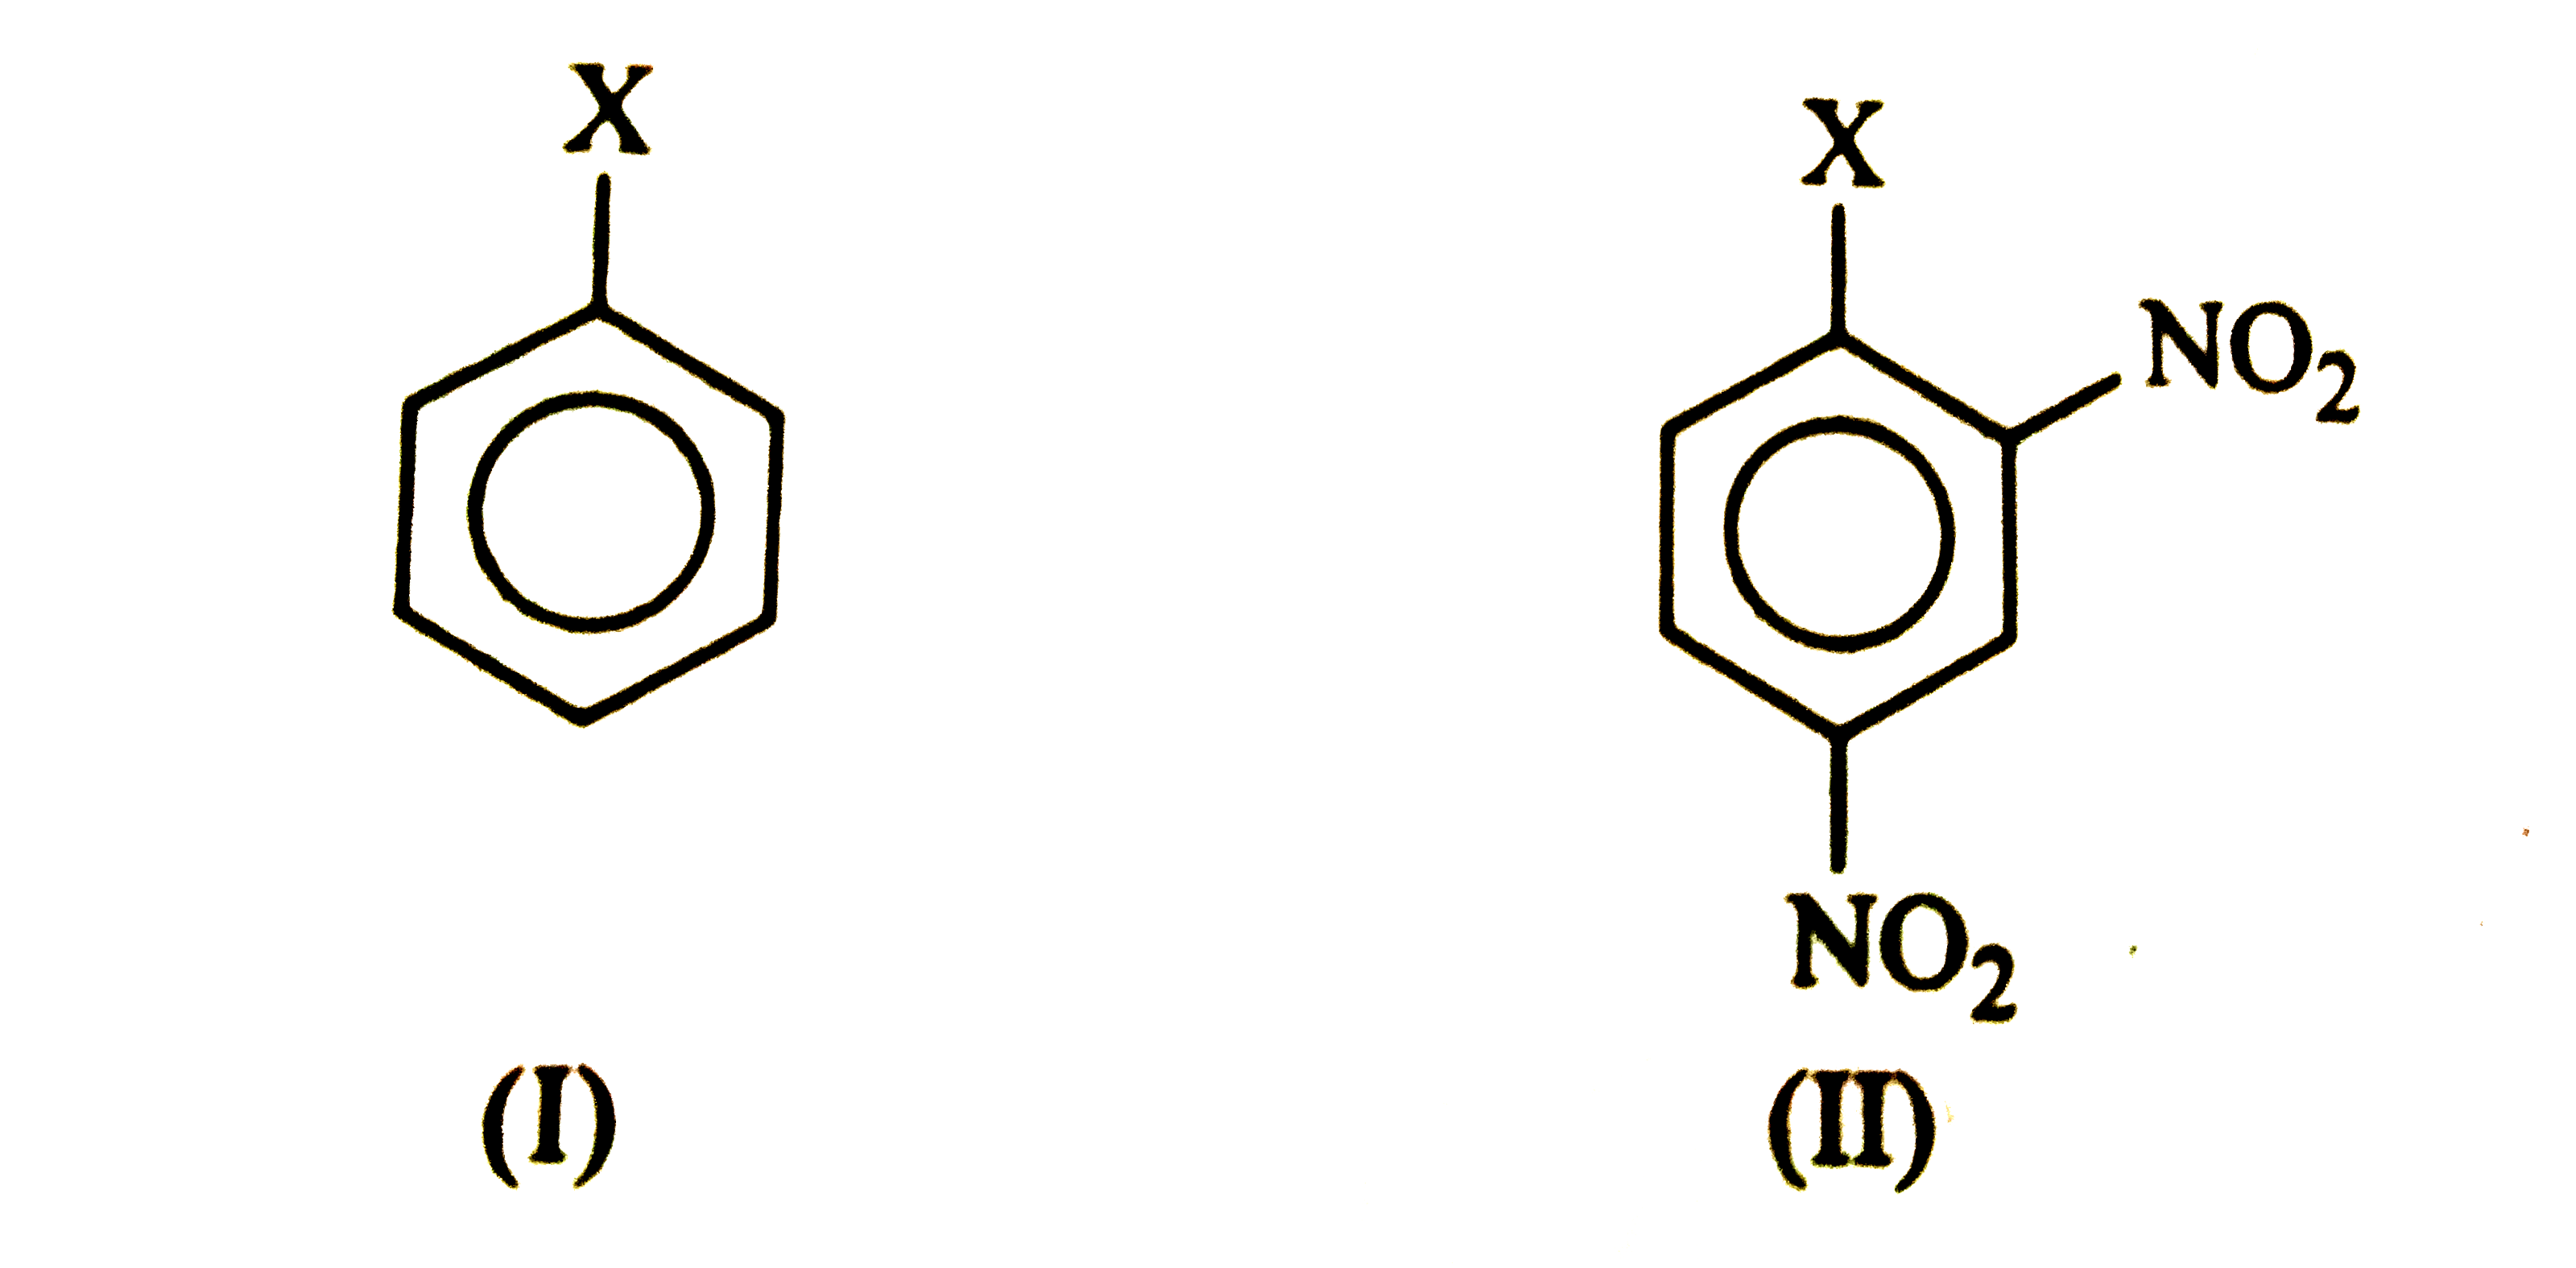 The correct order of increasing reactivity of C-X bond towards nucleophile in the following compound is